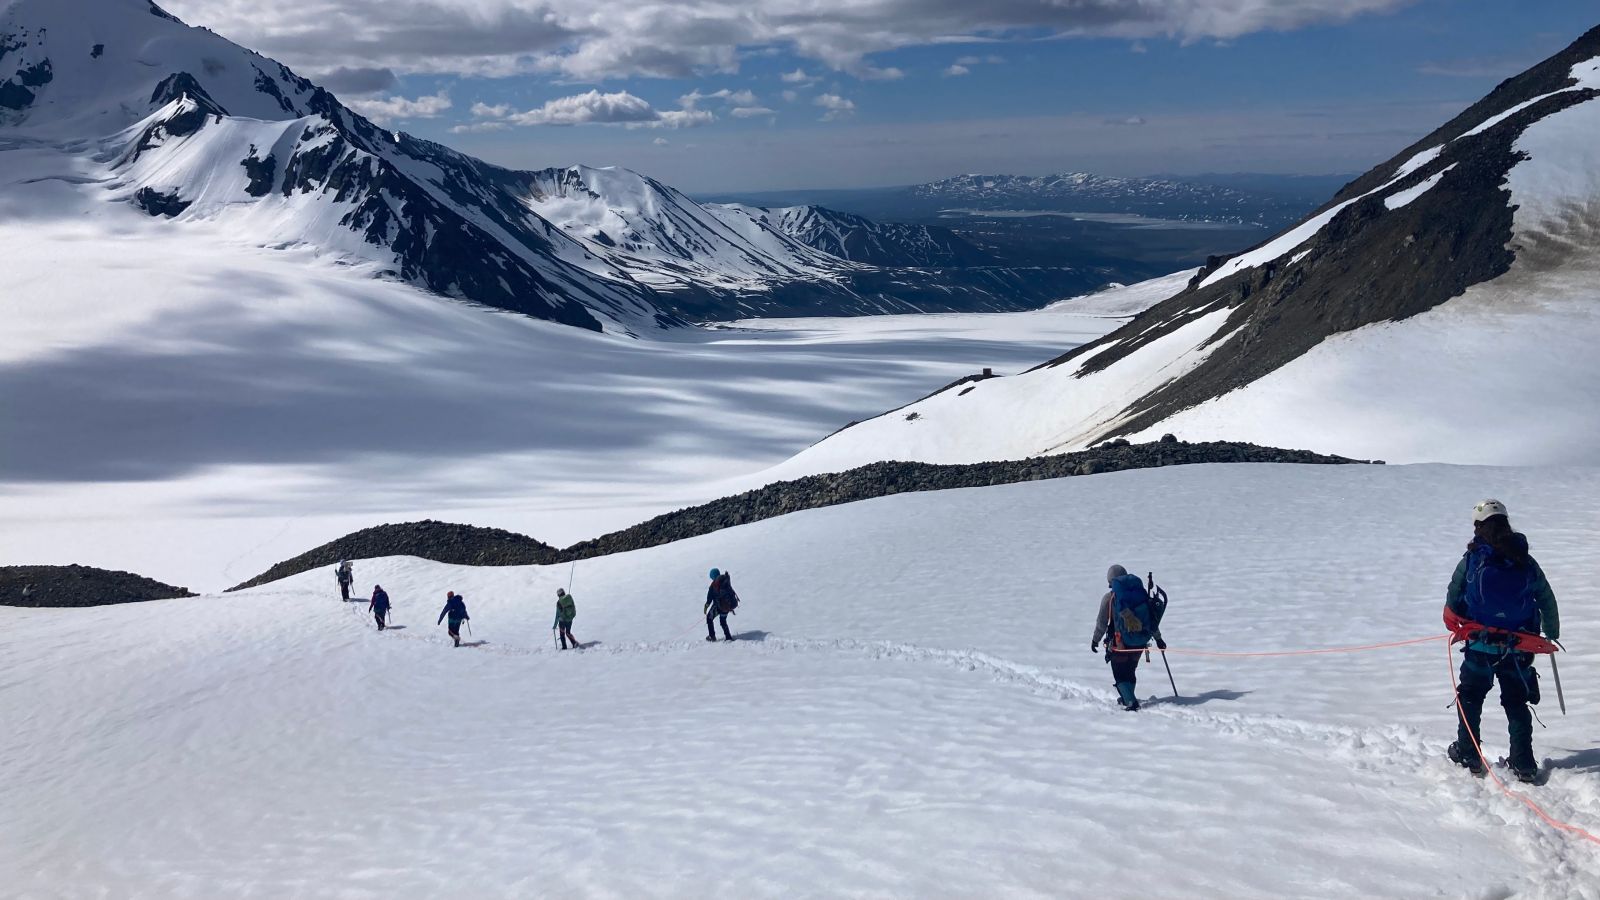 A group of mountaineers roped together crossing a glacier.